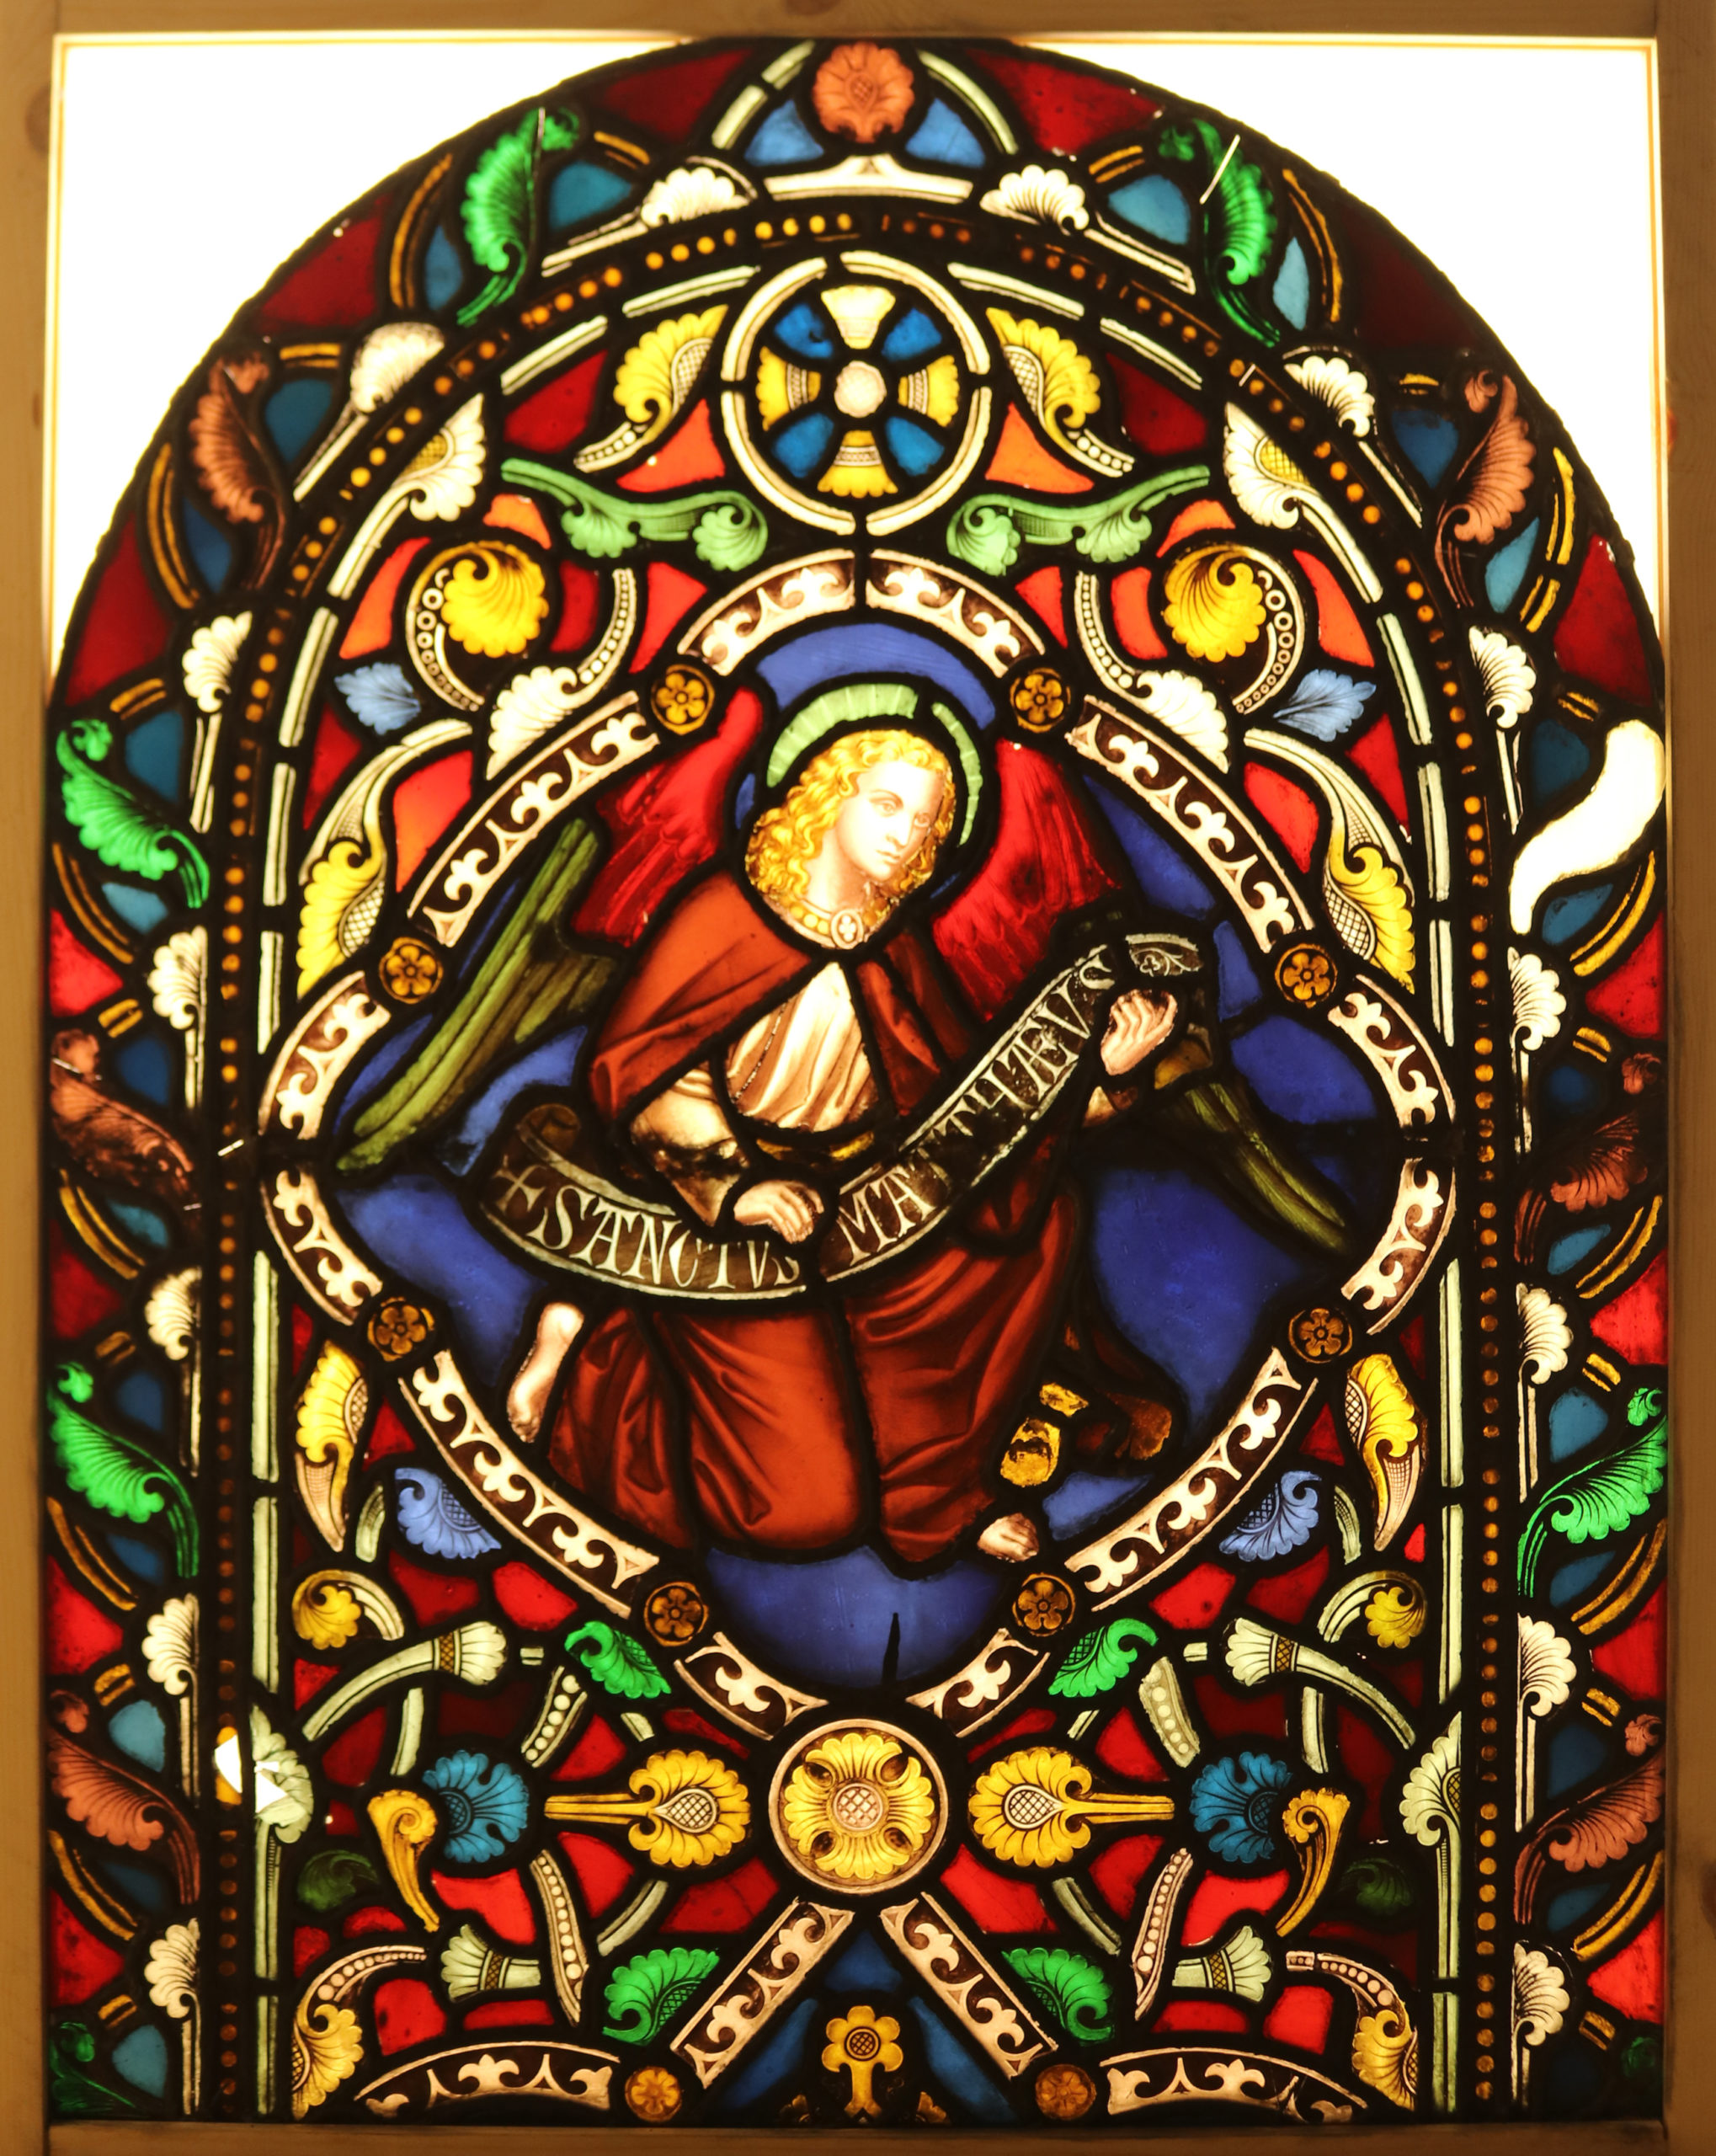 A Reclaimed Antique Stained Glass Window Panel - UK Architectural Heritage